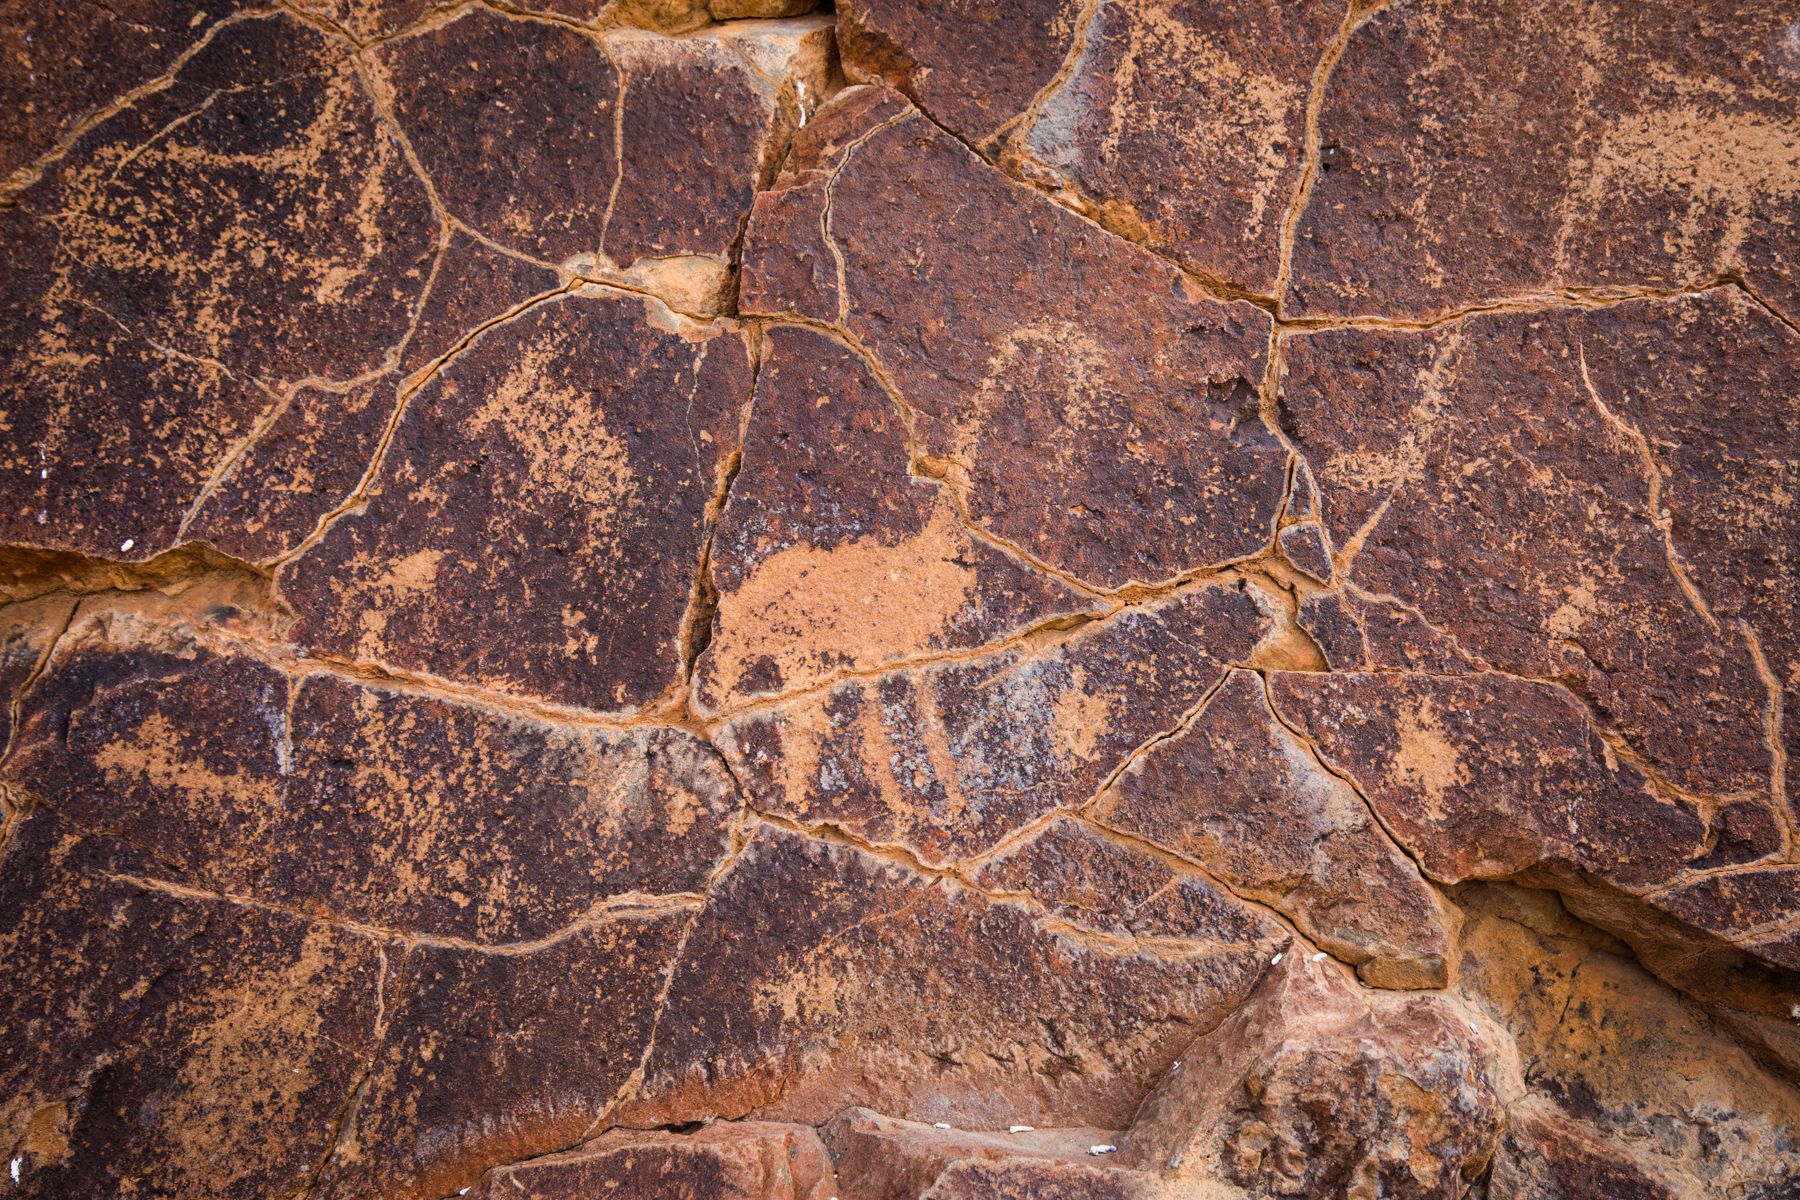 Ancient (dating back to 9th century) rock petroglyphs in Damaraland during our Namibia photography tour